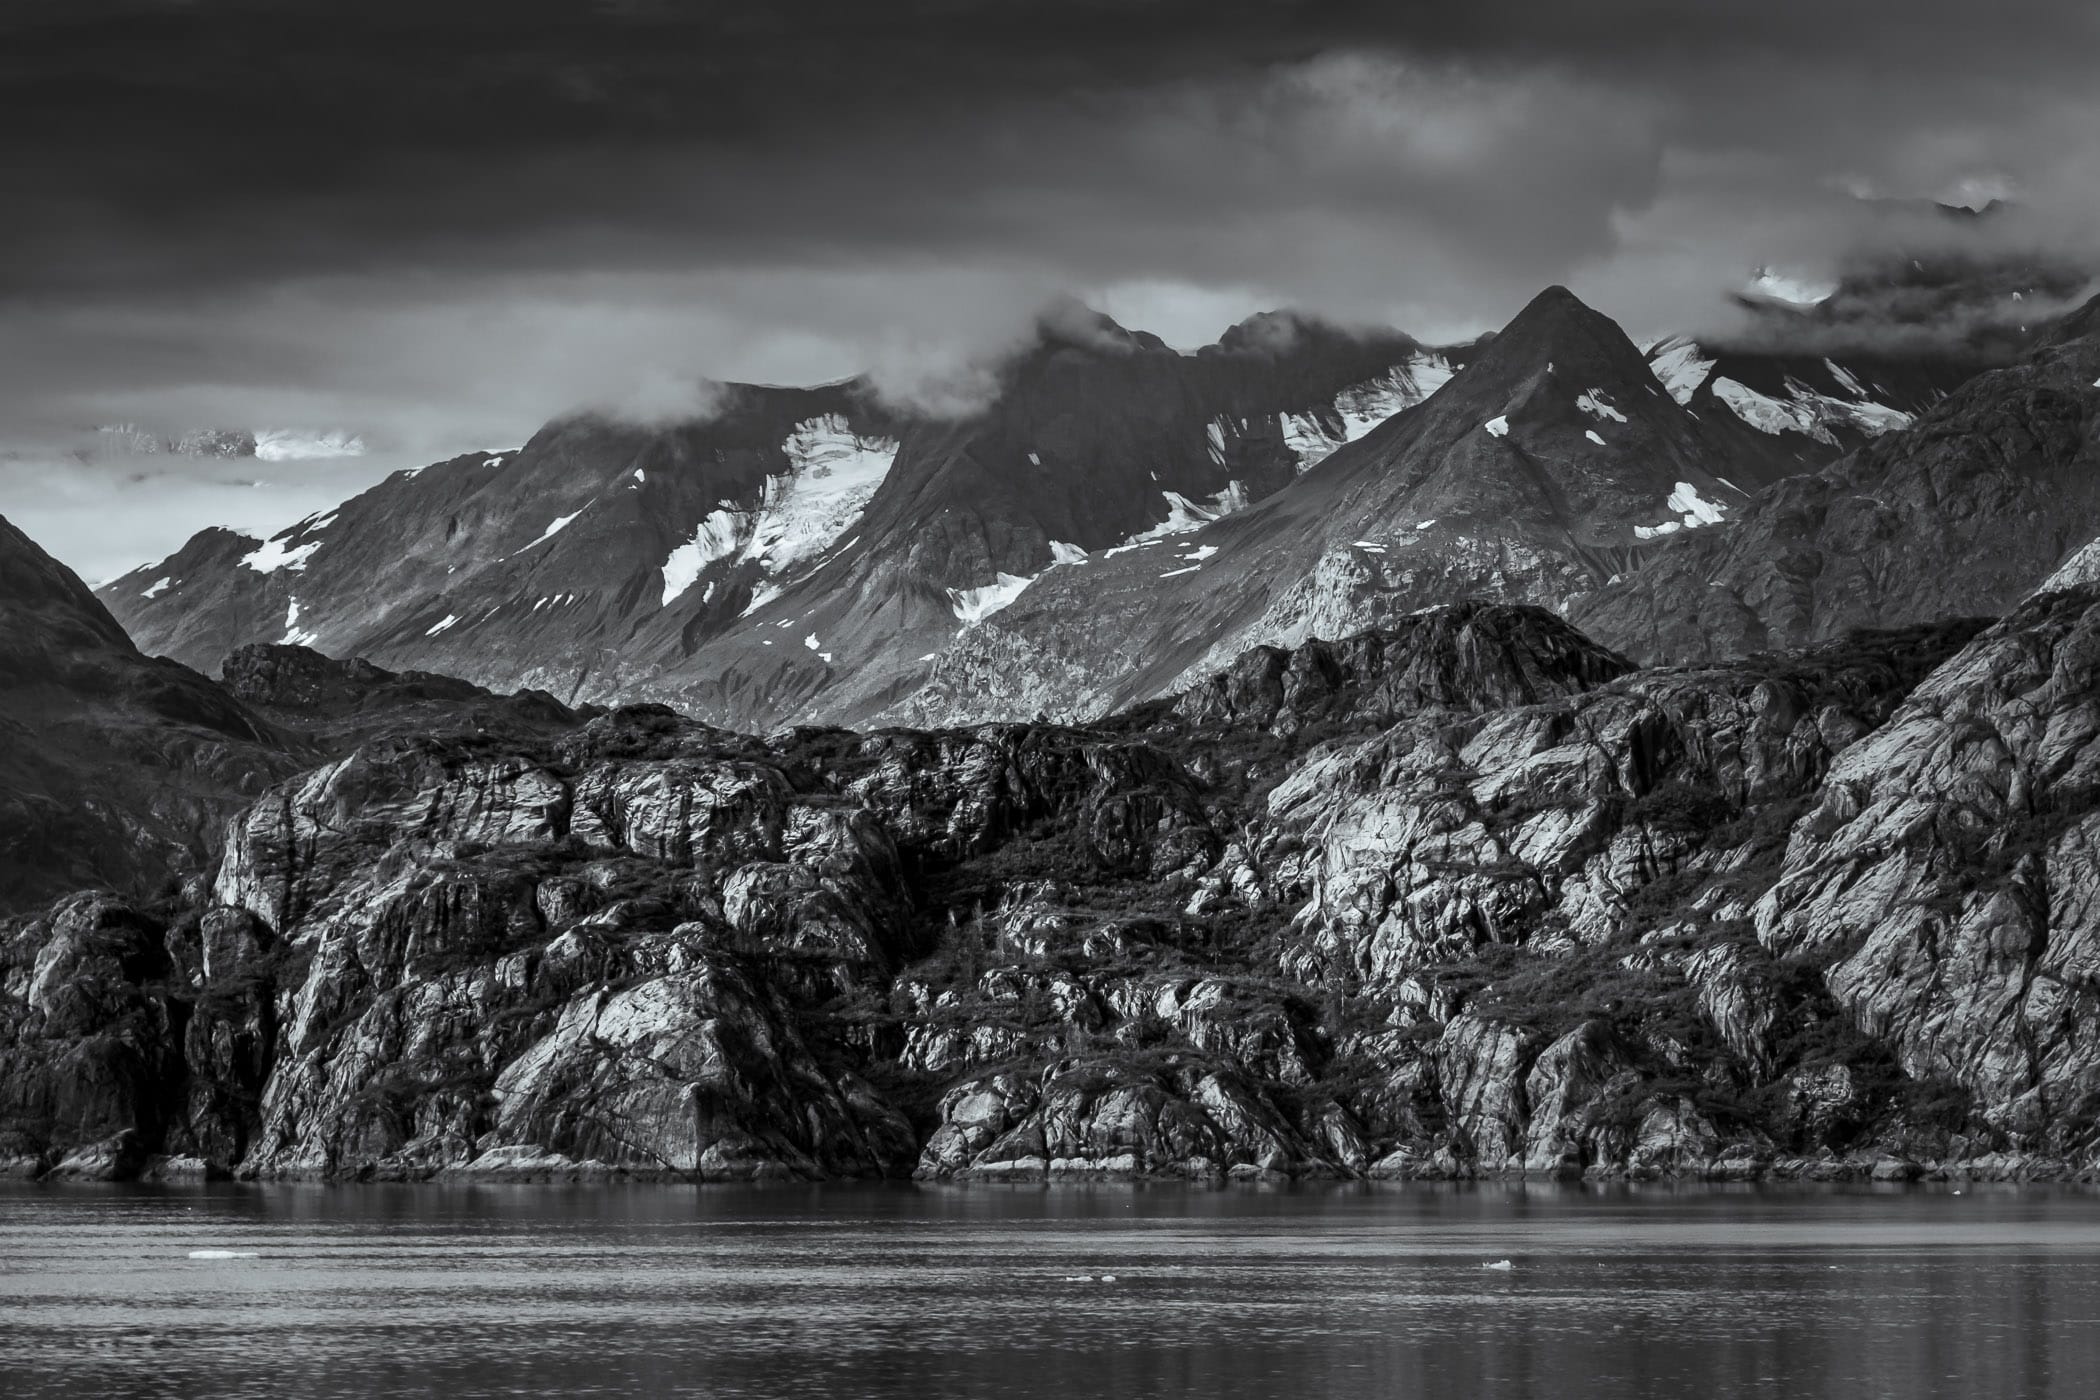 Clouds obscure the peaks of mountains in Alaska's Glacier Bay National Park.